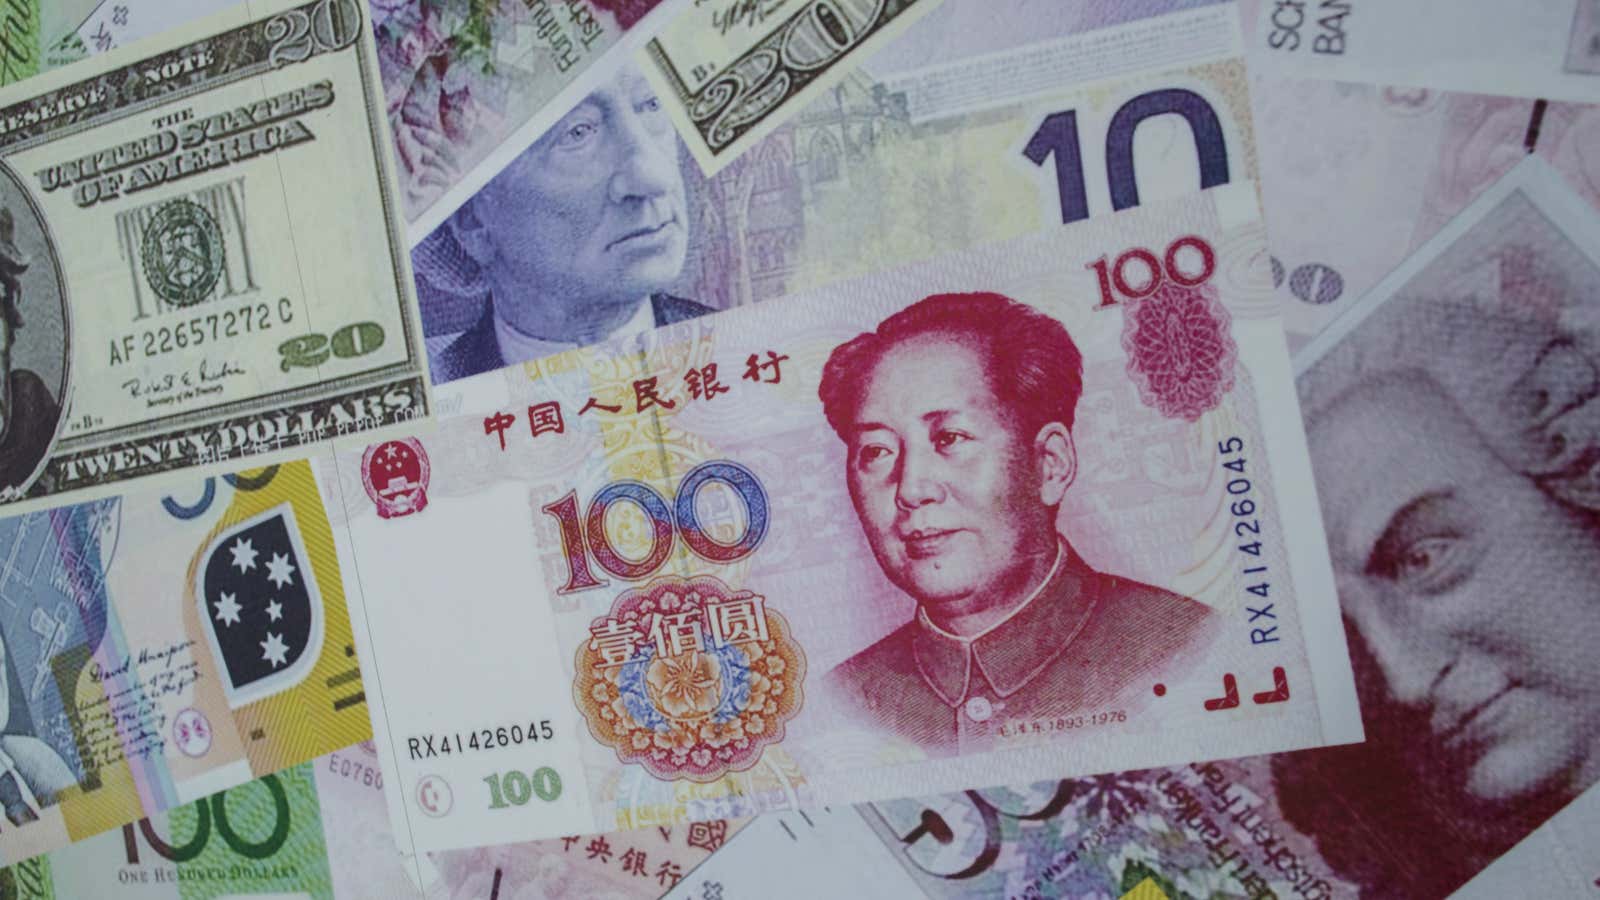 The Chinese yuan won’t become a global reserve currency any time soon